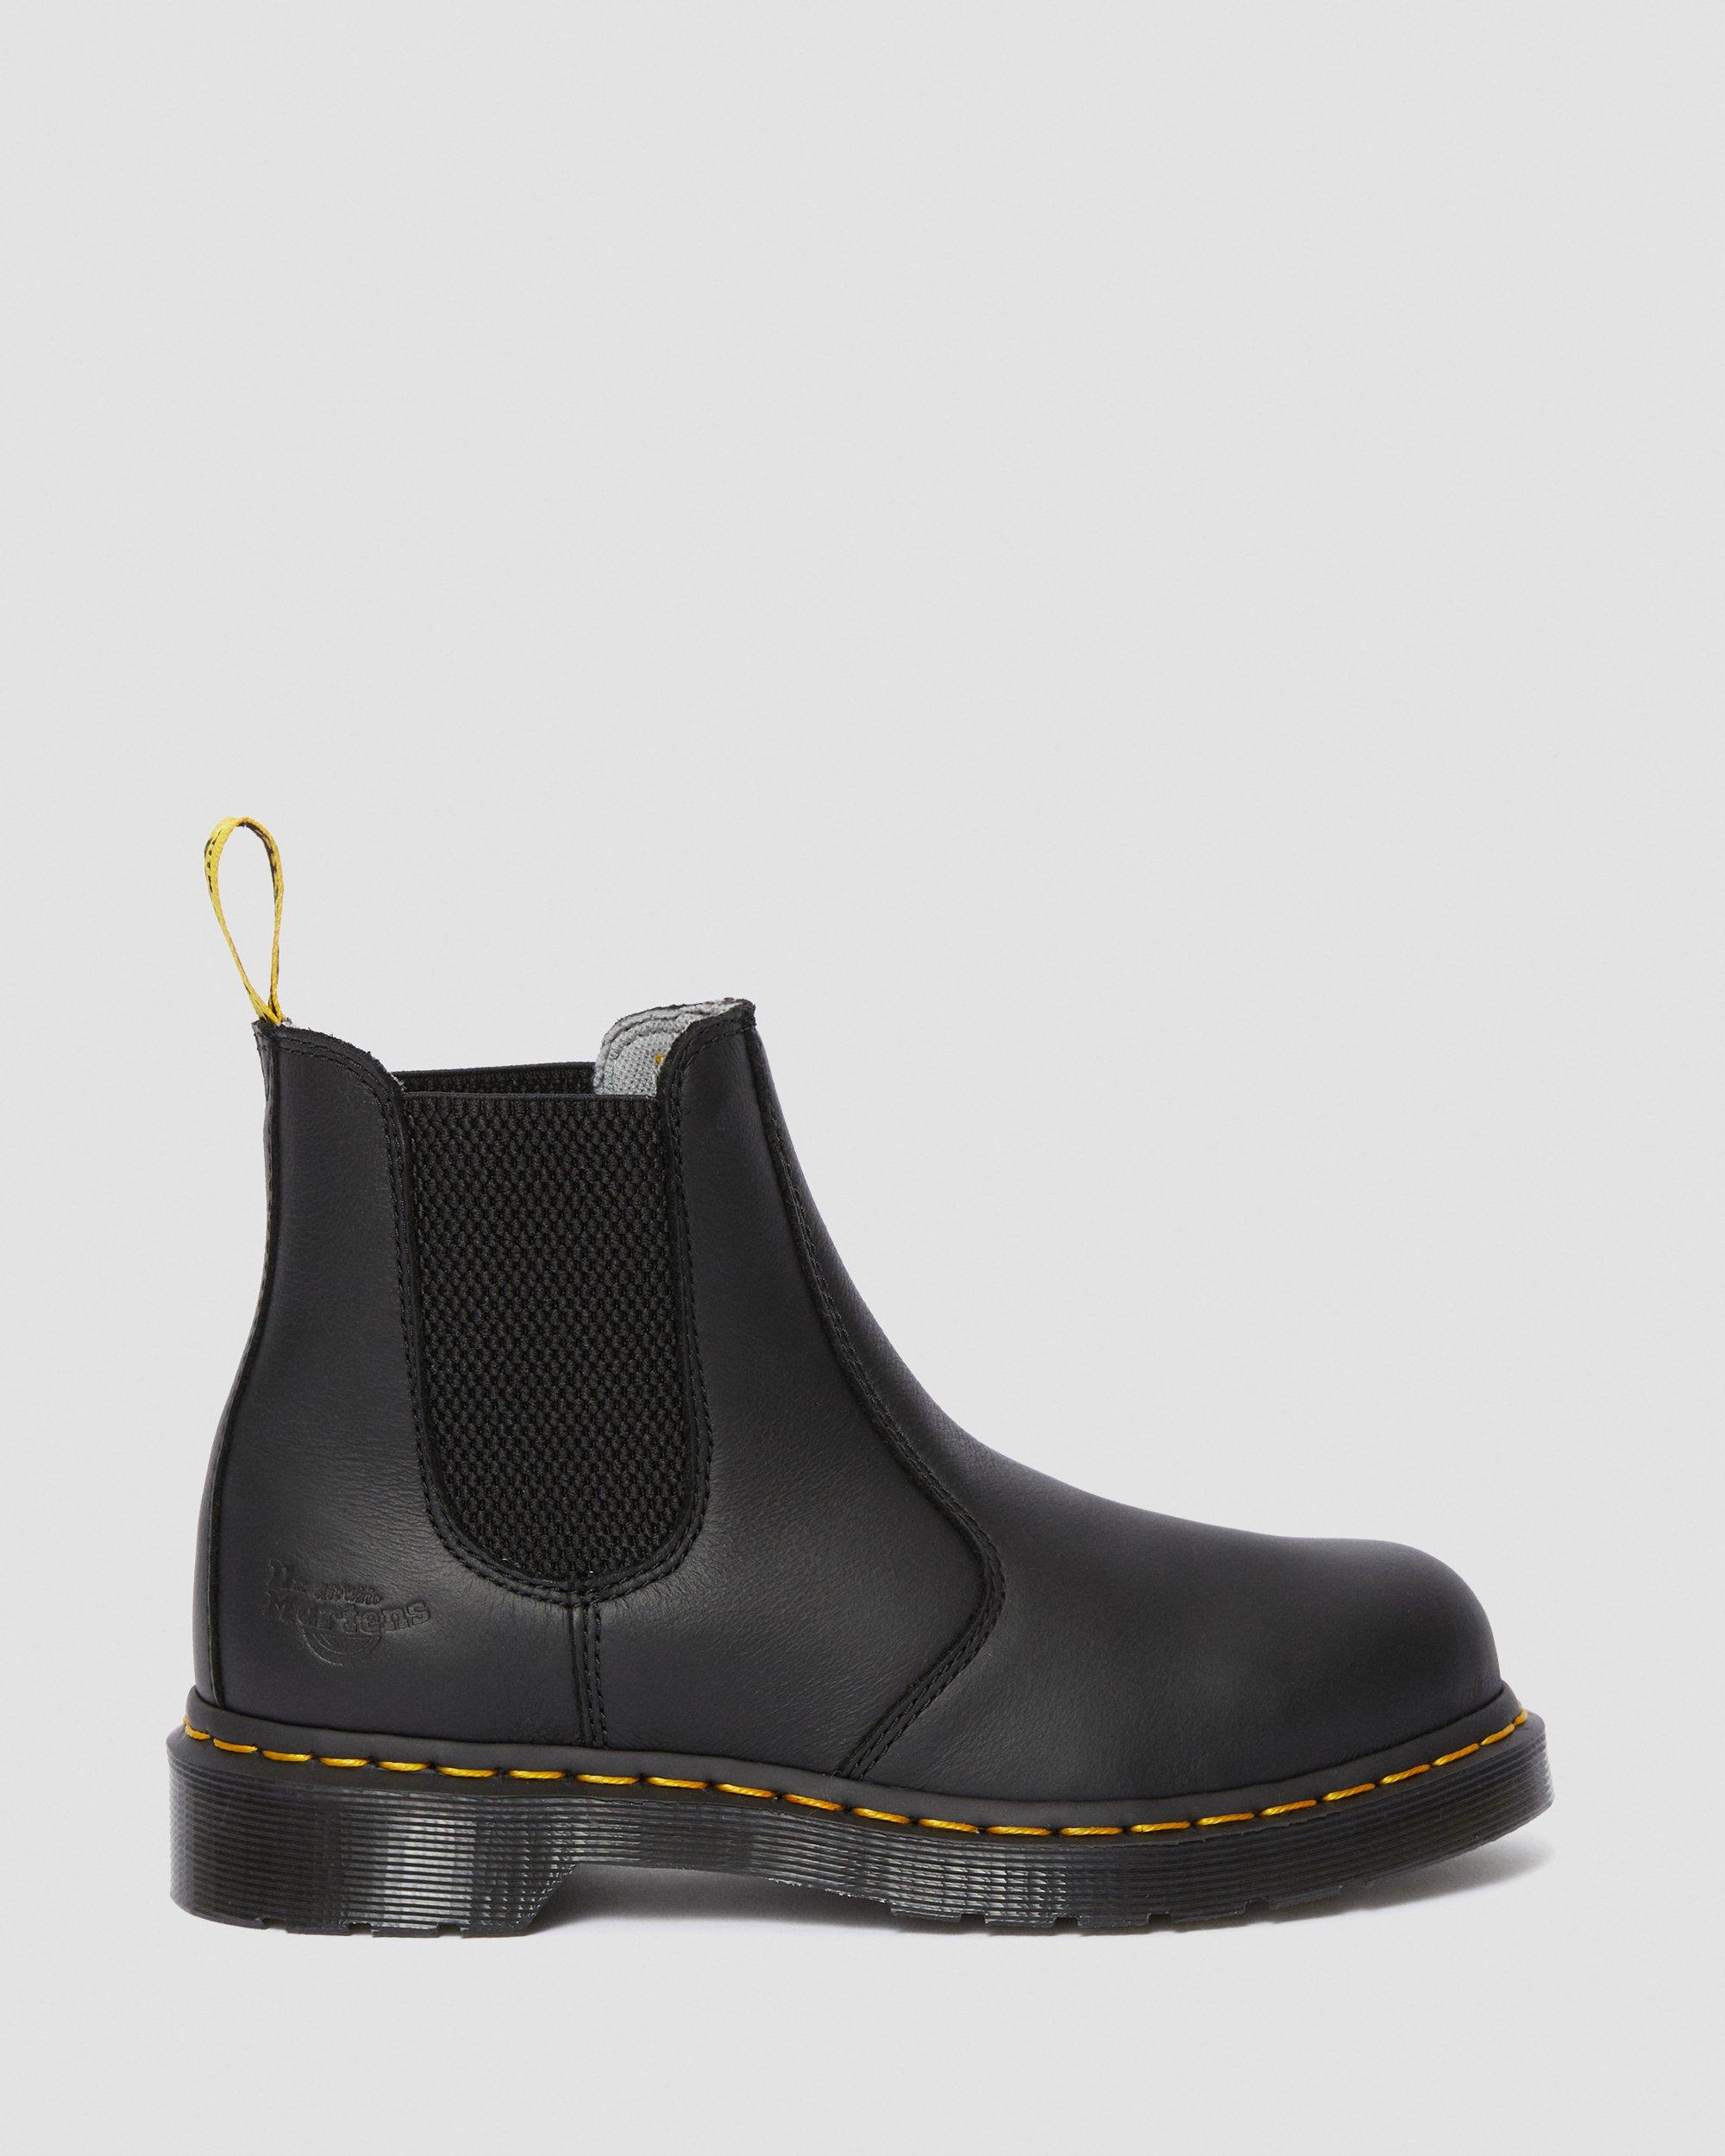 ARBOR WOMENS STEEL TOE BOOTS in Black | Dr. Martens